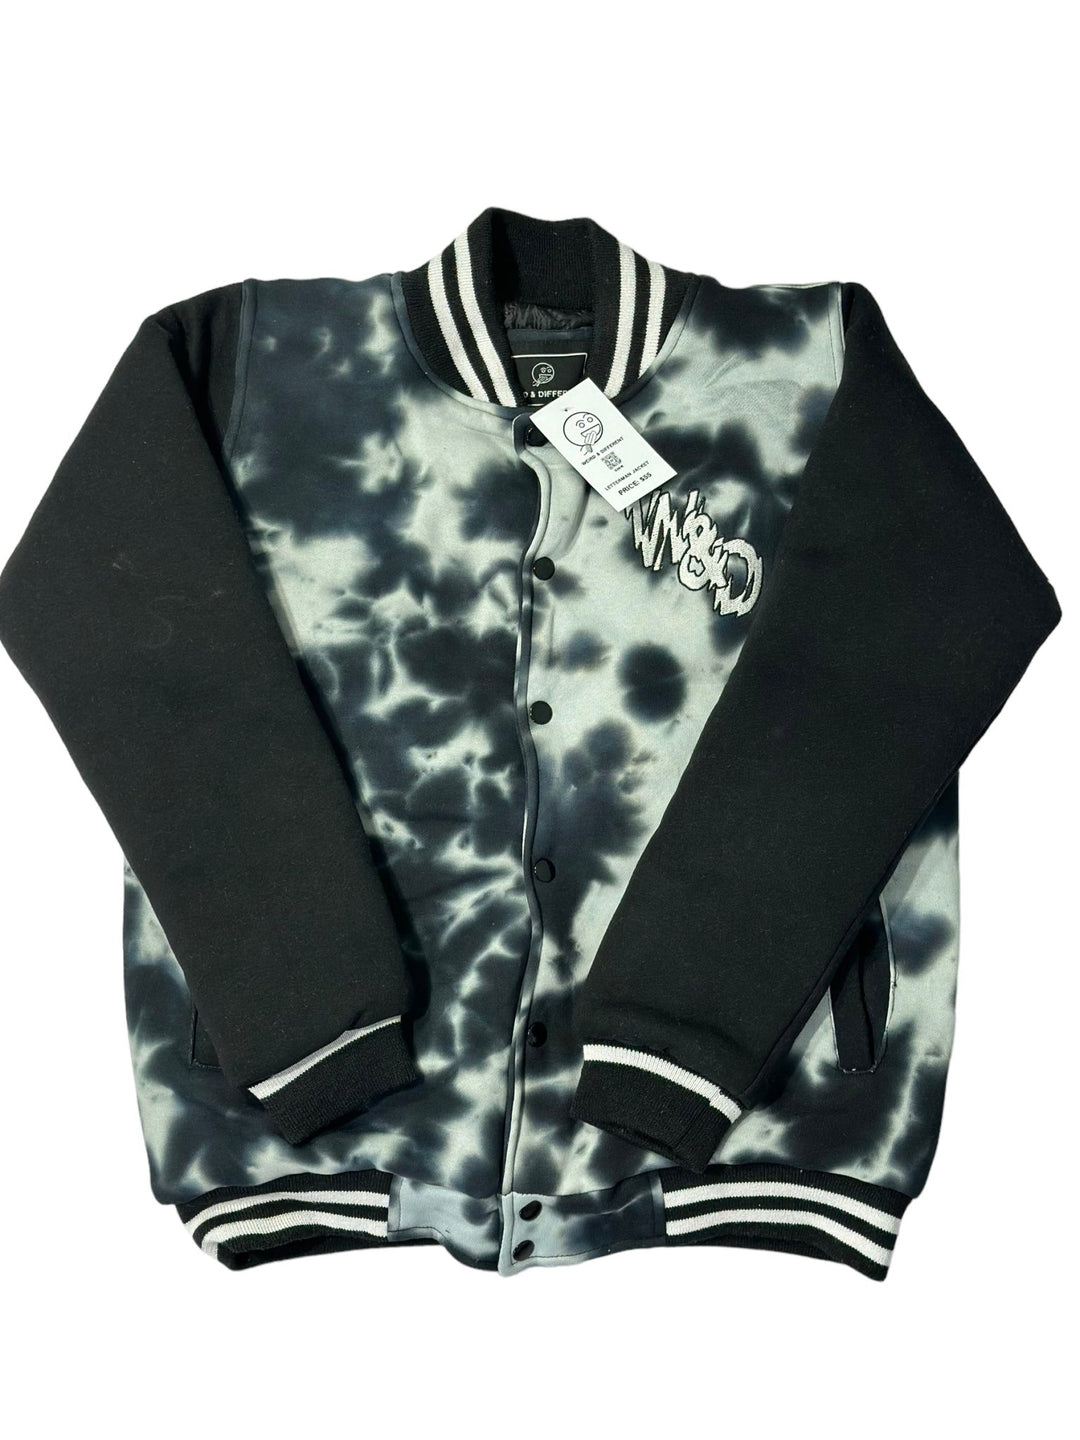 Limited Edition letterman Jacket - Weird & Different